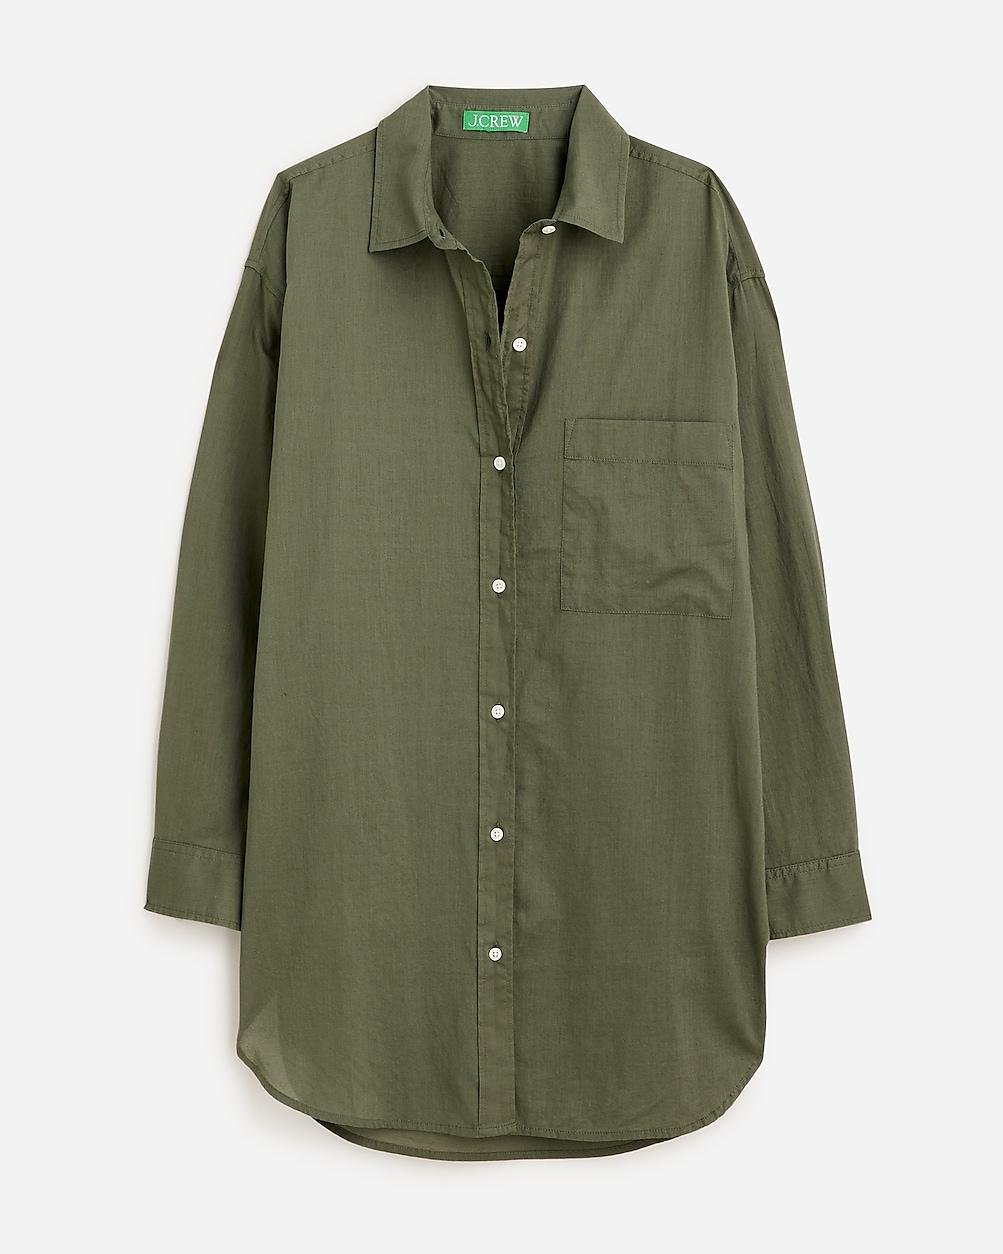 Button-up cotton voile shirt by J.CREW